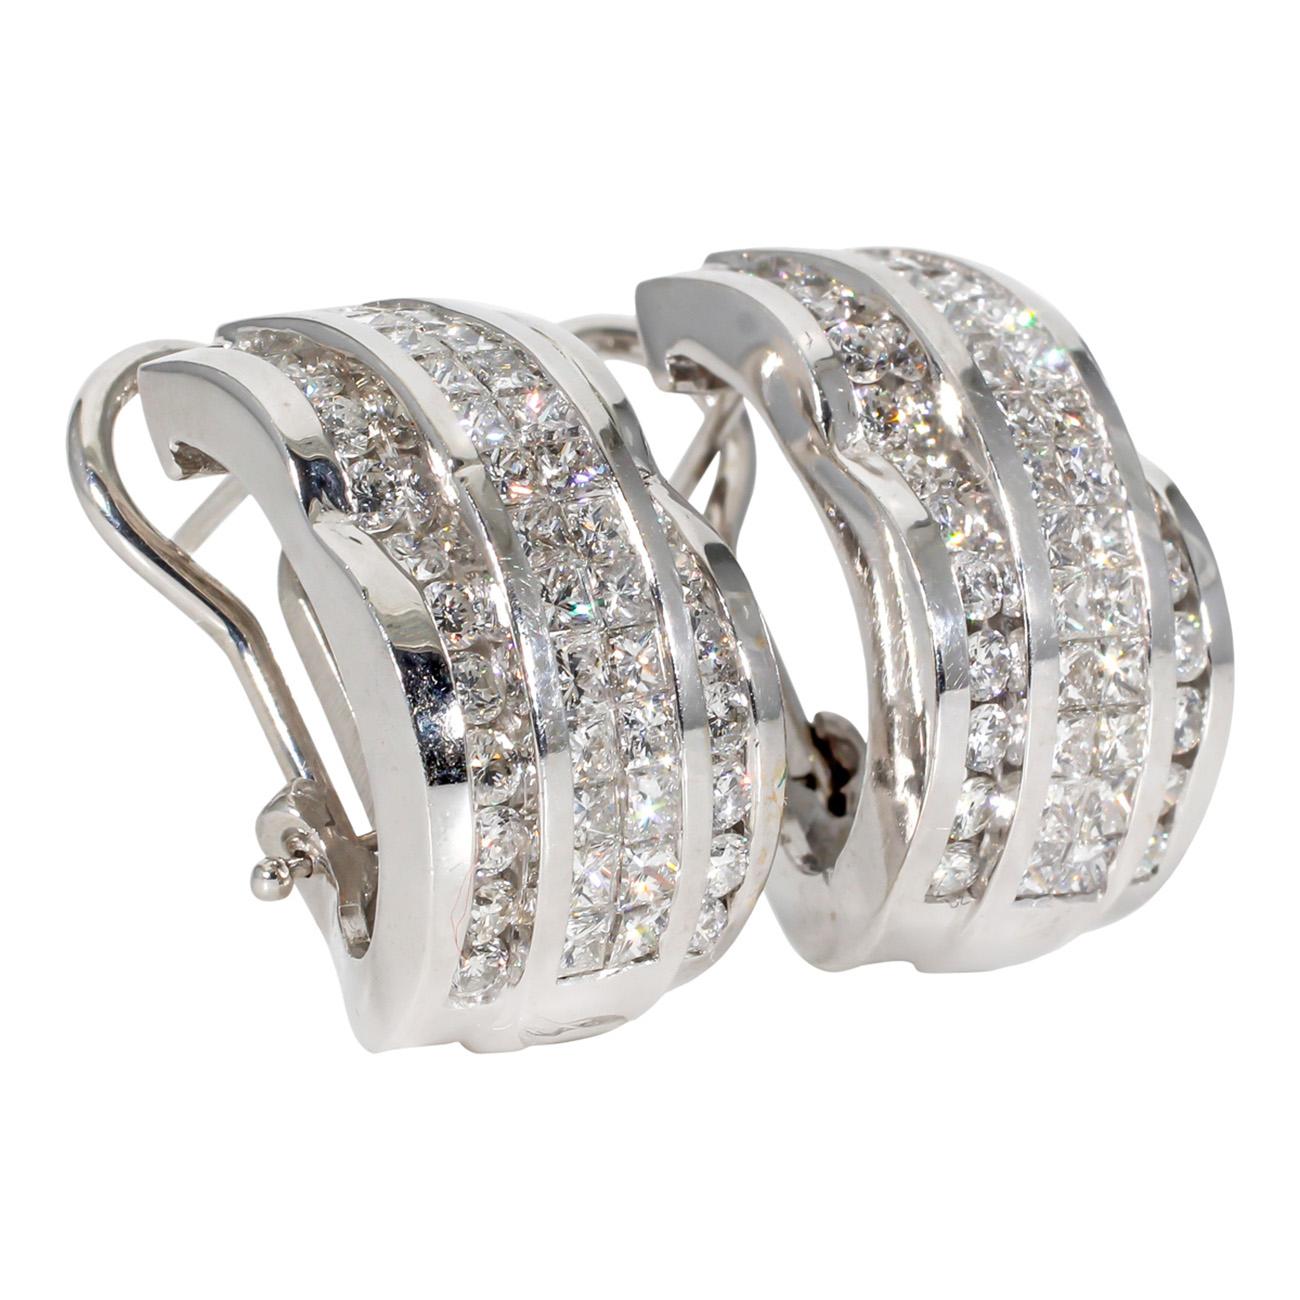 Scalloped style French Clip earrings with invisible set round diamonds.  D3.55ct.t.w.